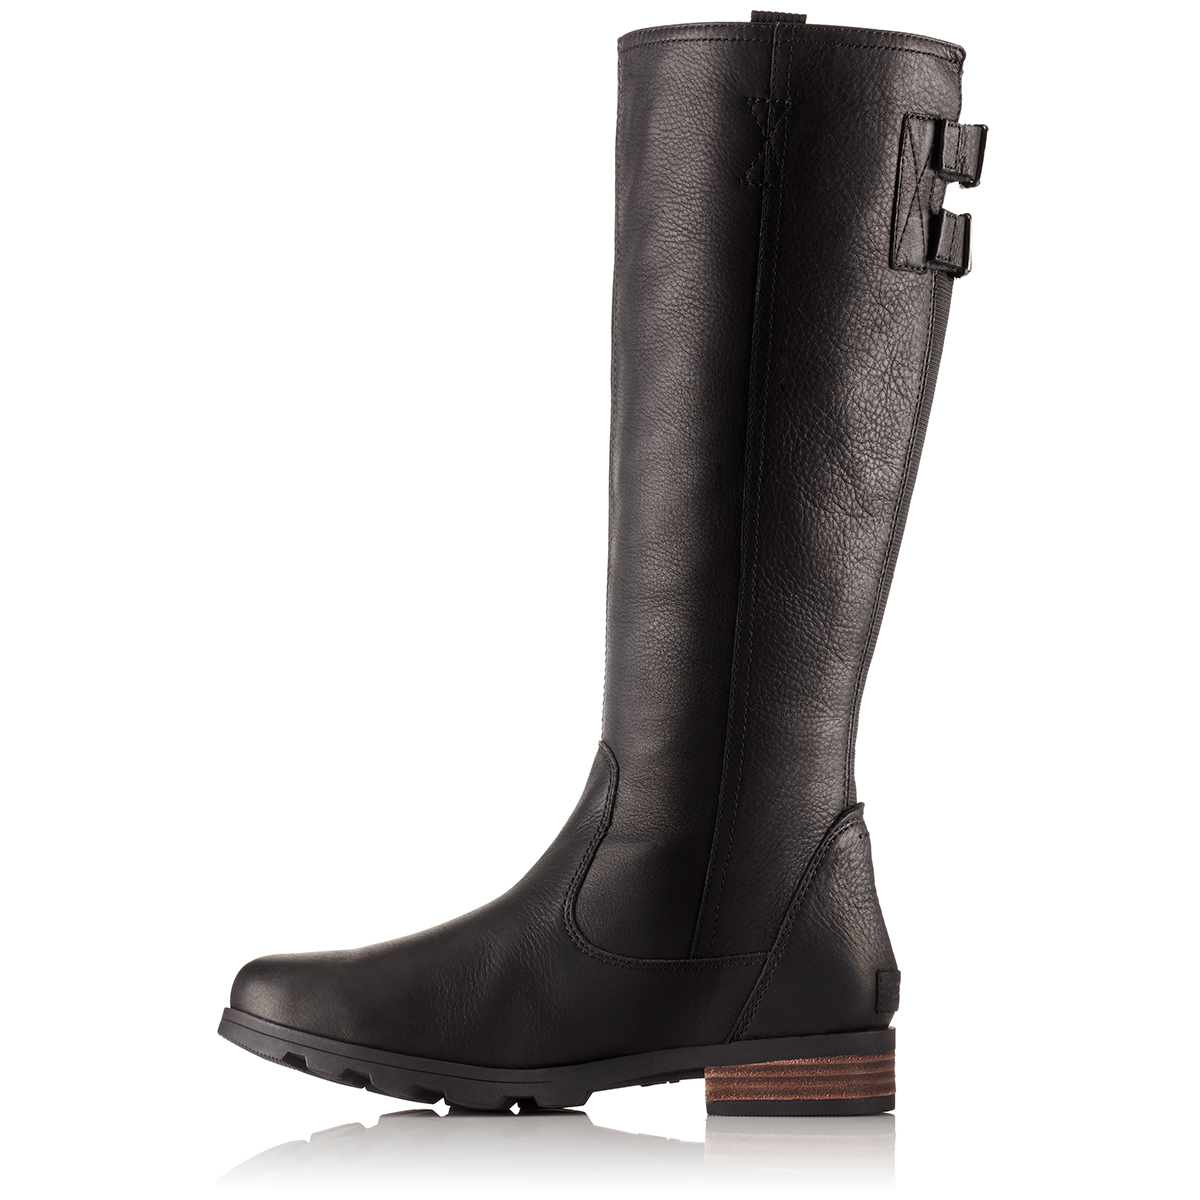 sorel waterproof tall leather boots